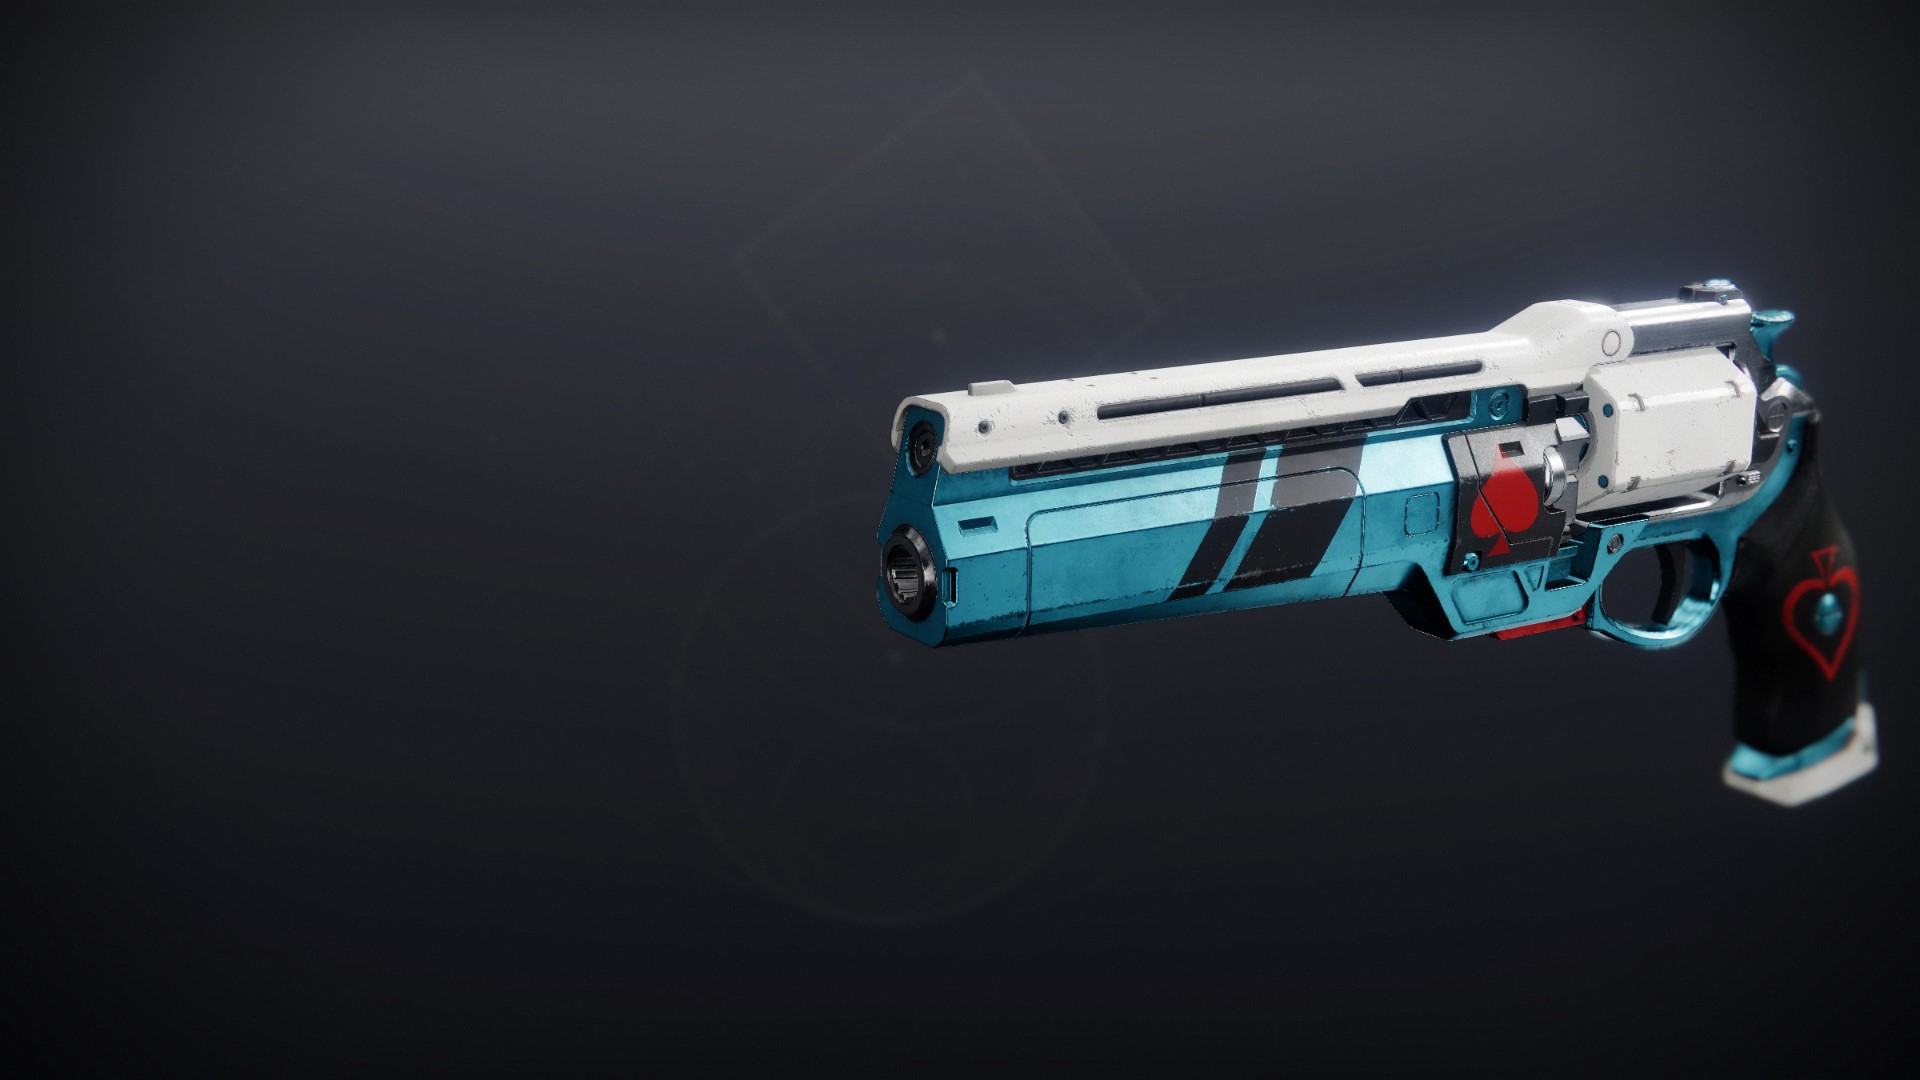 An in-game render of the The Vanguard Dare.